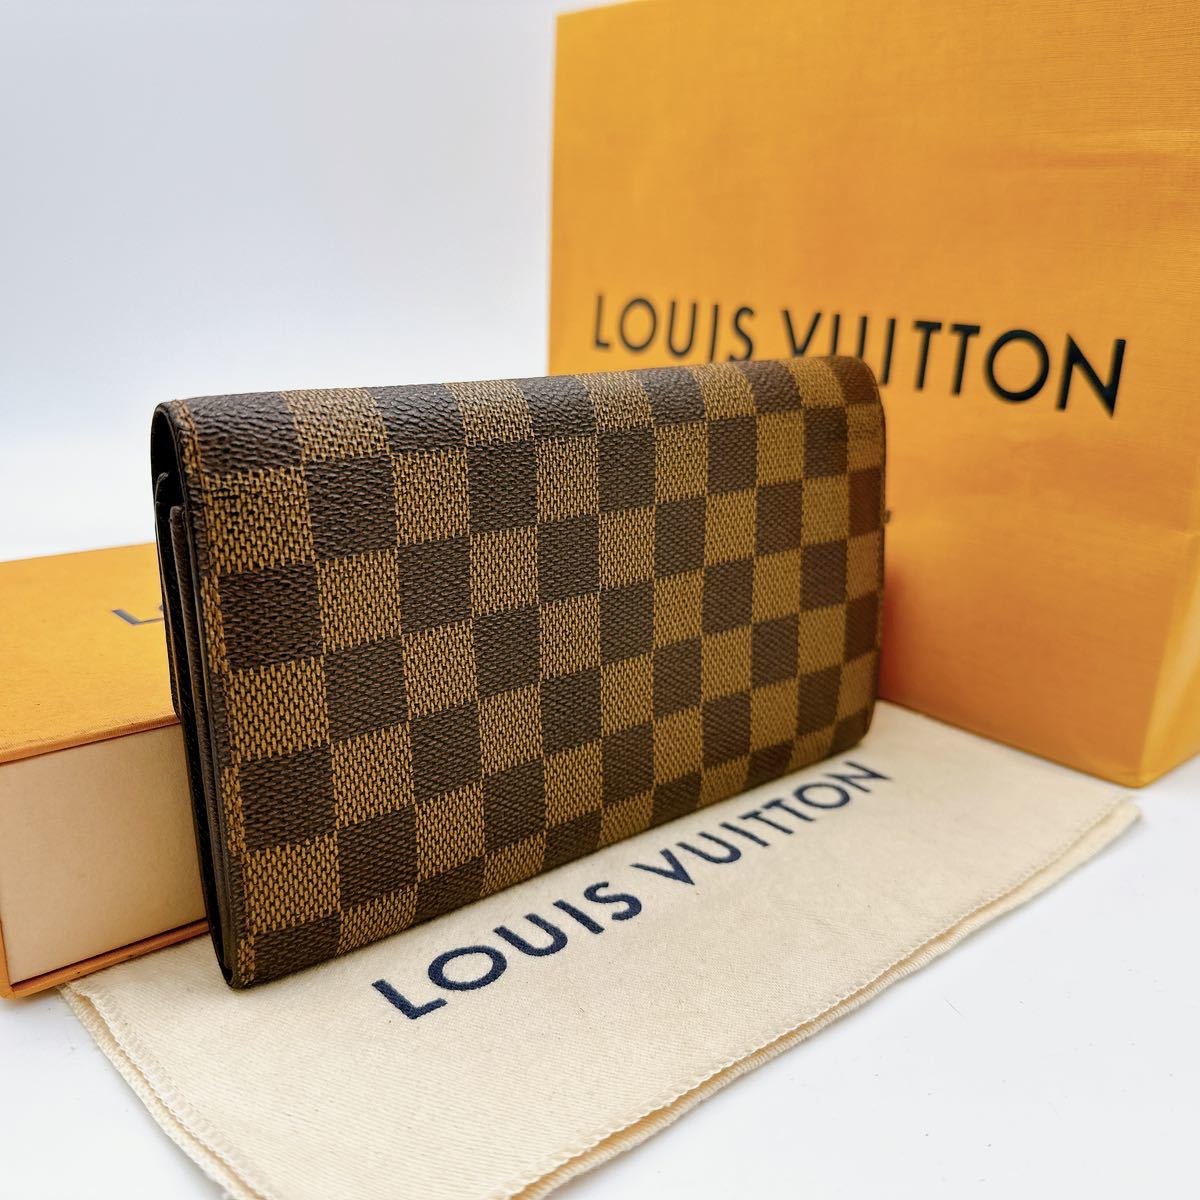 A2337【美品】LOUIS VUITTON ルイヴィトン ダミエ ポシェット ポルト